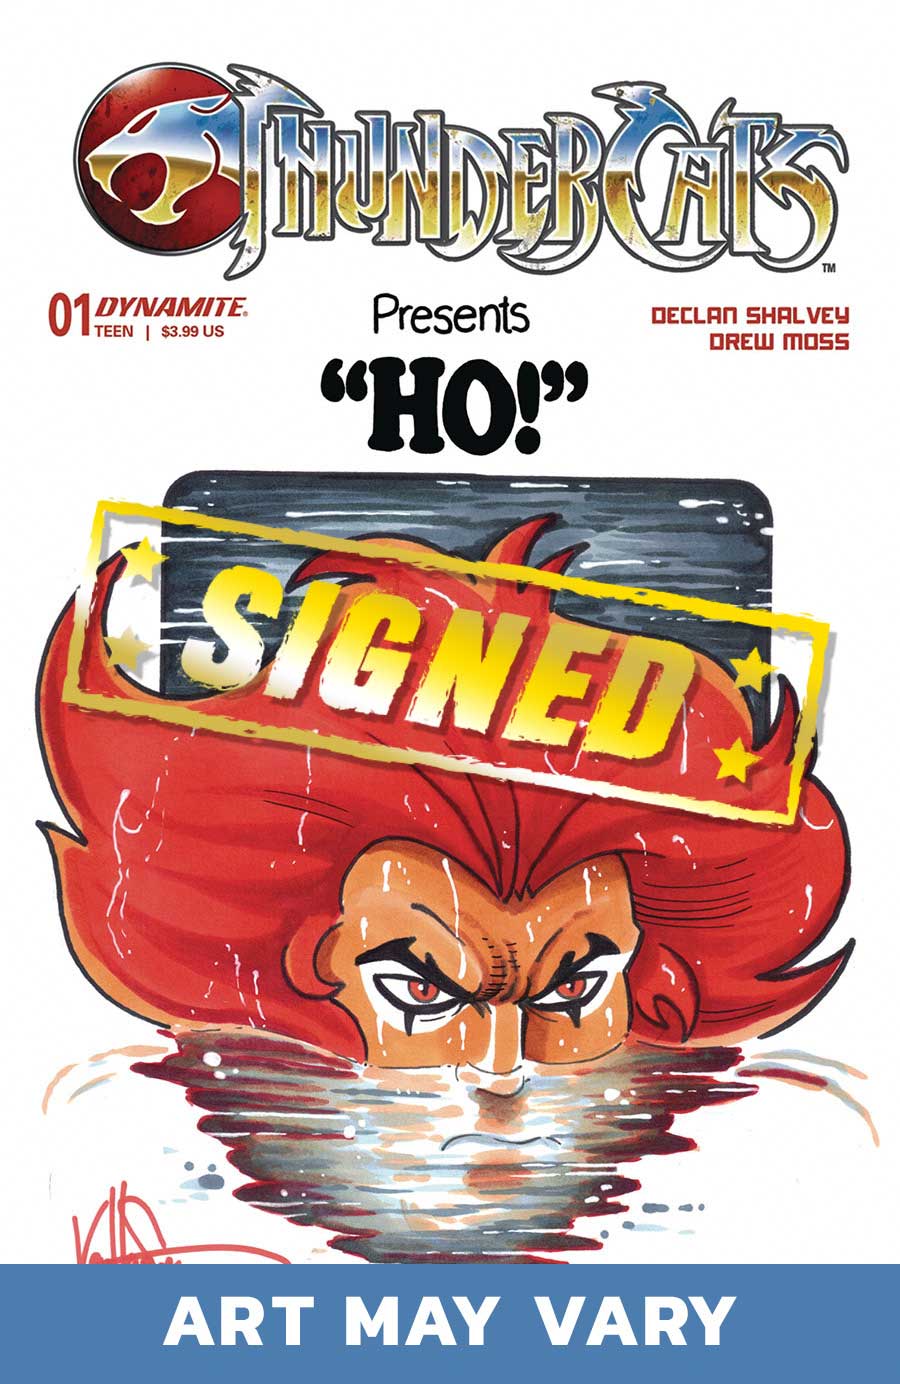 Thundercats Vol 3 #1 Cover Z-K DF Signed & Remarked Homage Hand-Drawn Sketch Cover By Ken Haeser